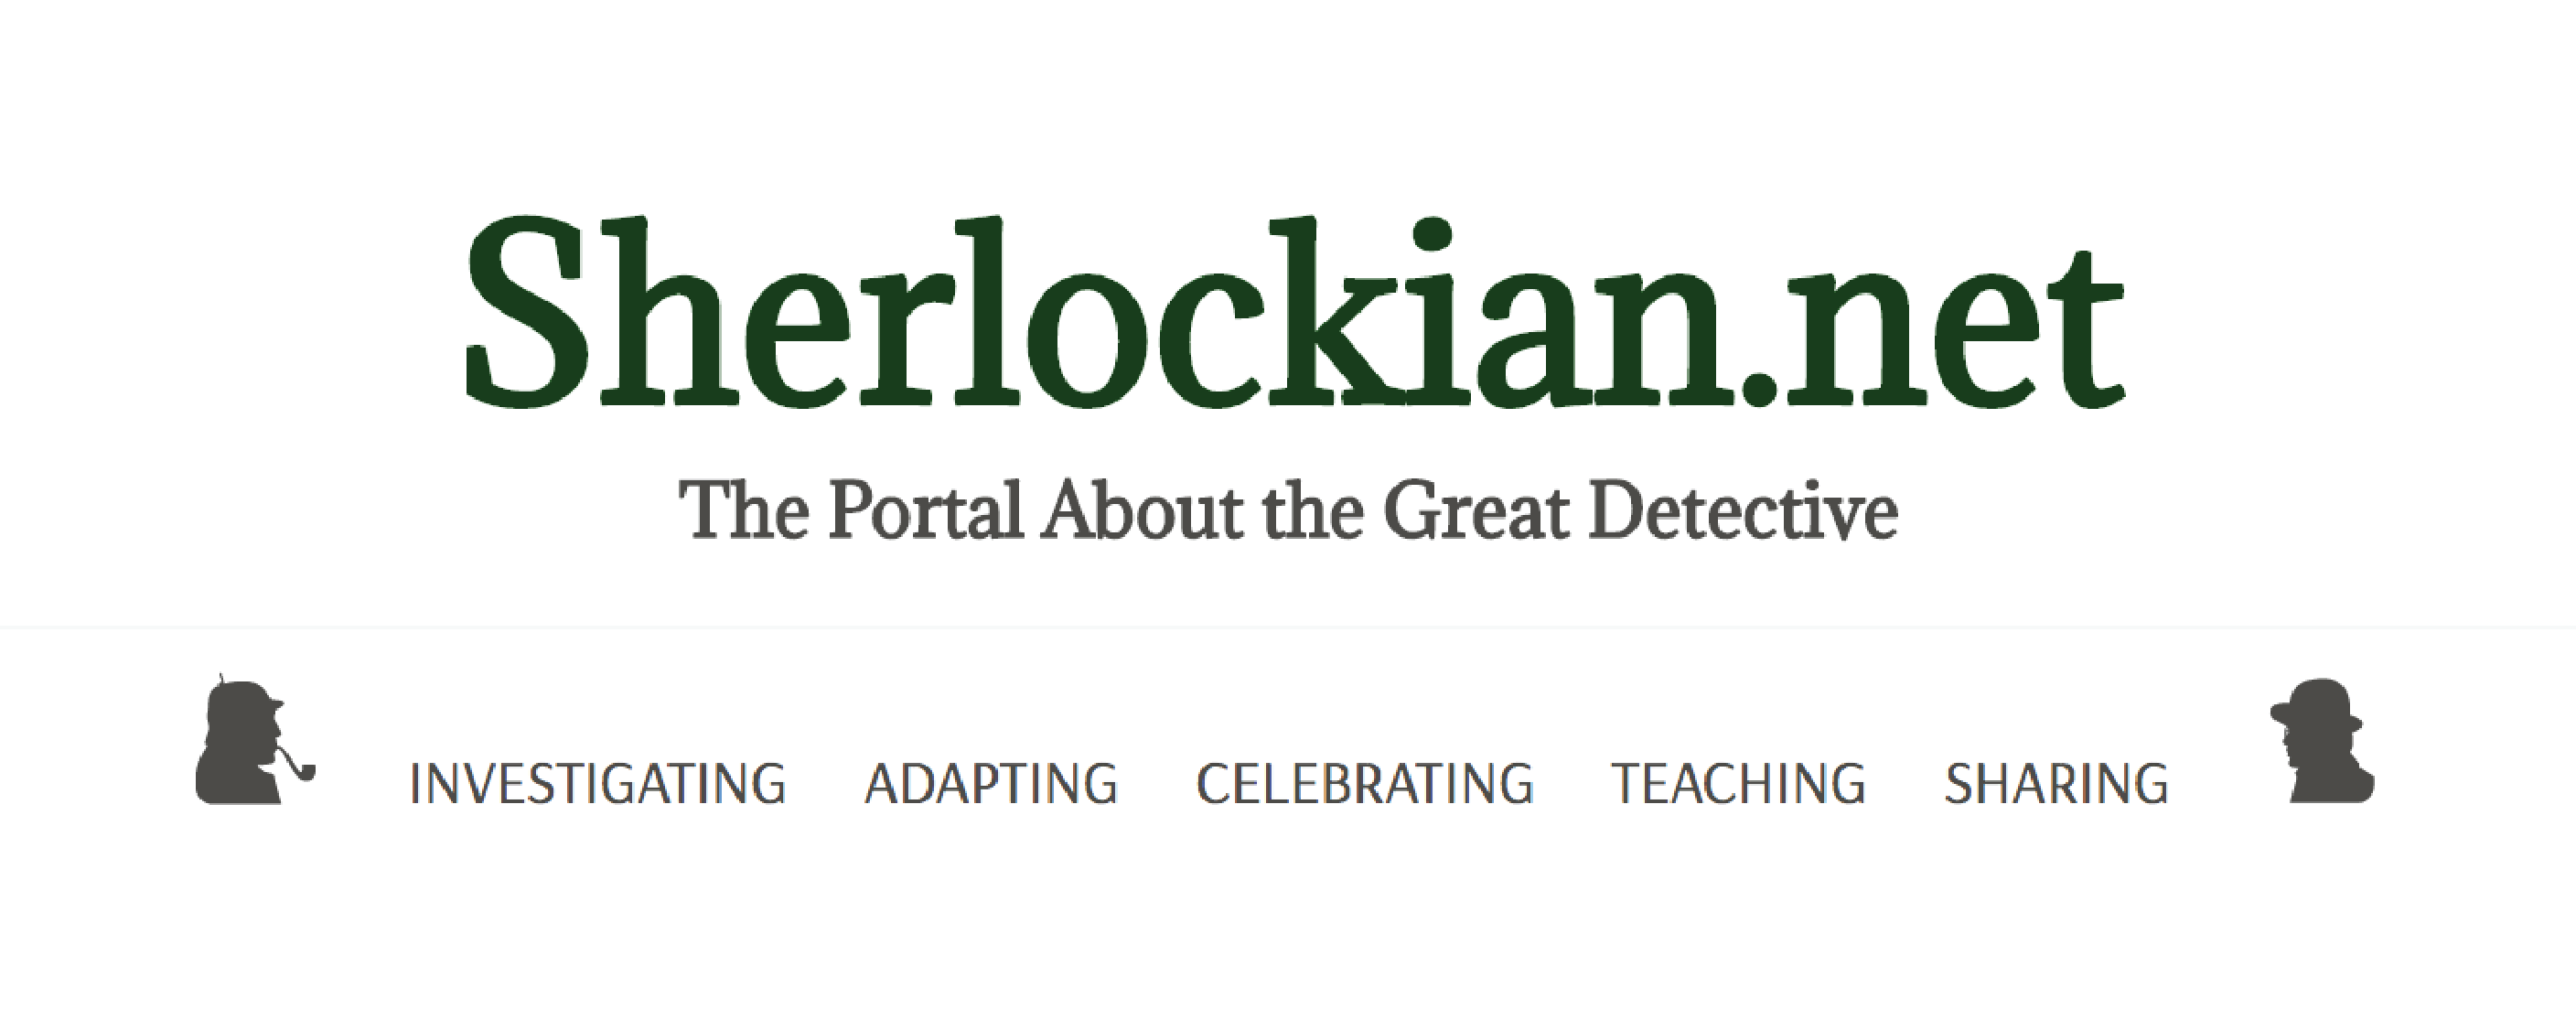 Headings and unordered lists of links styled according to the Sherlockian.net guide.